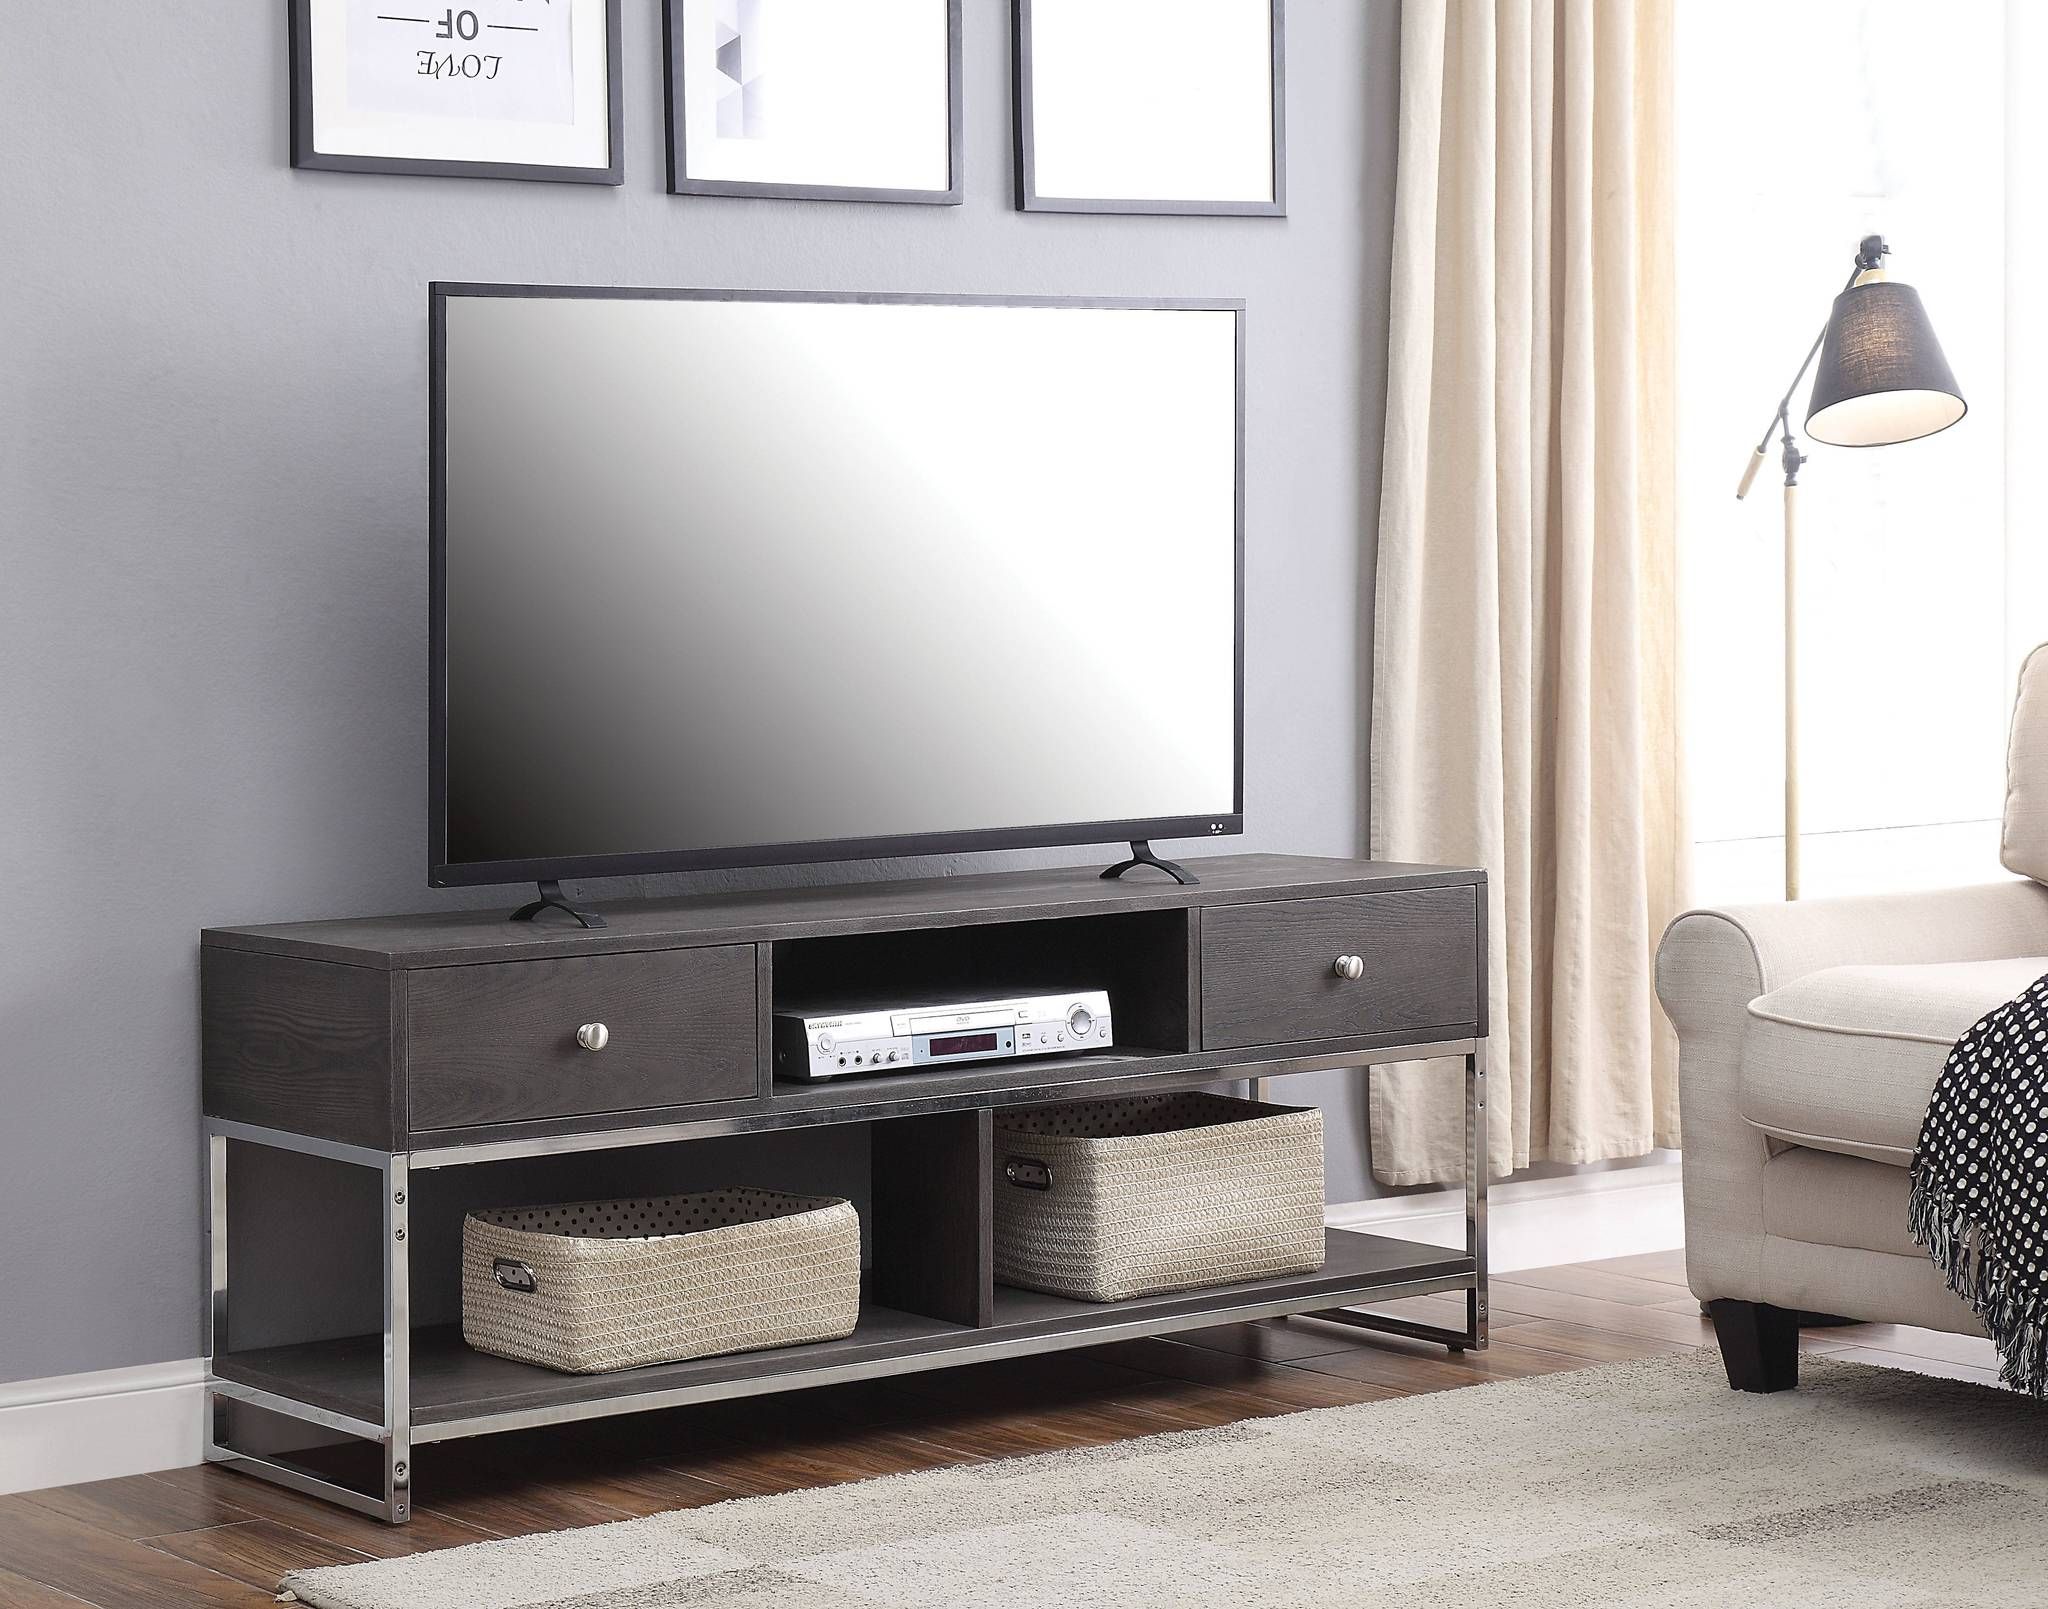 91204 Iban Gray Wood Metal Finish Modern Tv Stand Within Modern Black Tv Stands On Wheels With Metal Cart (View 1 of 15)